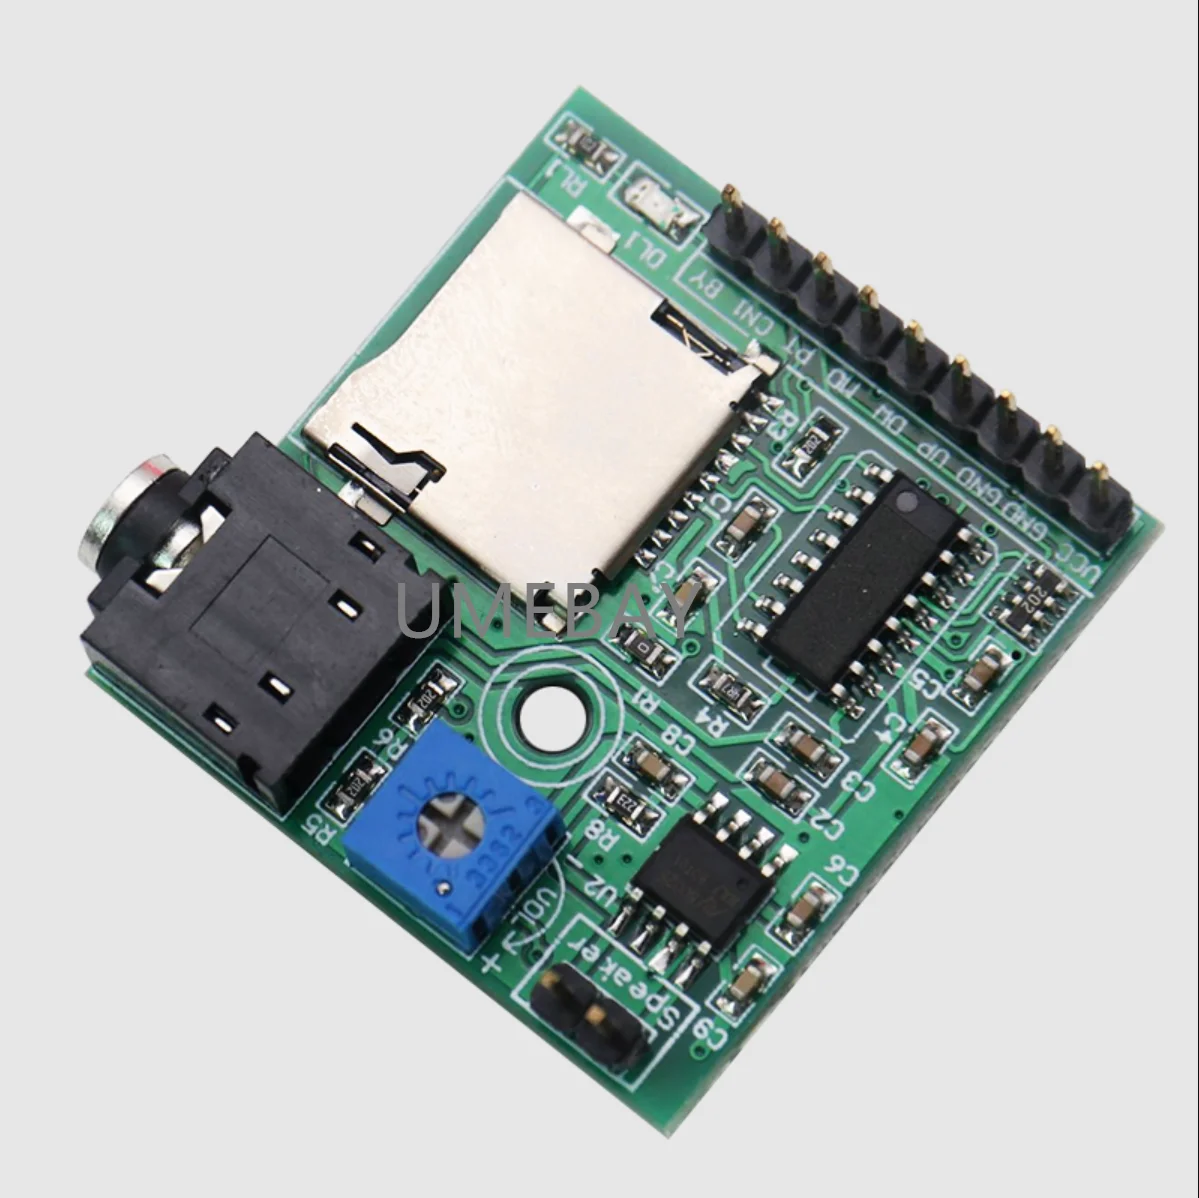 

5PCS MP3 playback module, voice trigger module, supports pause of previous and next tracks, microcontroller with 3w power ampl